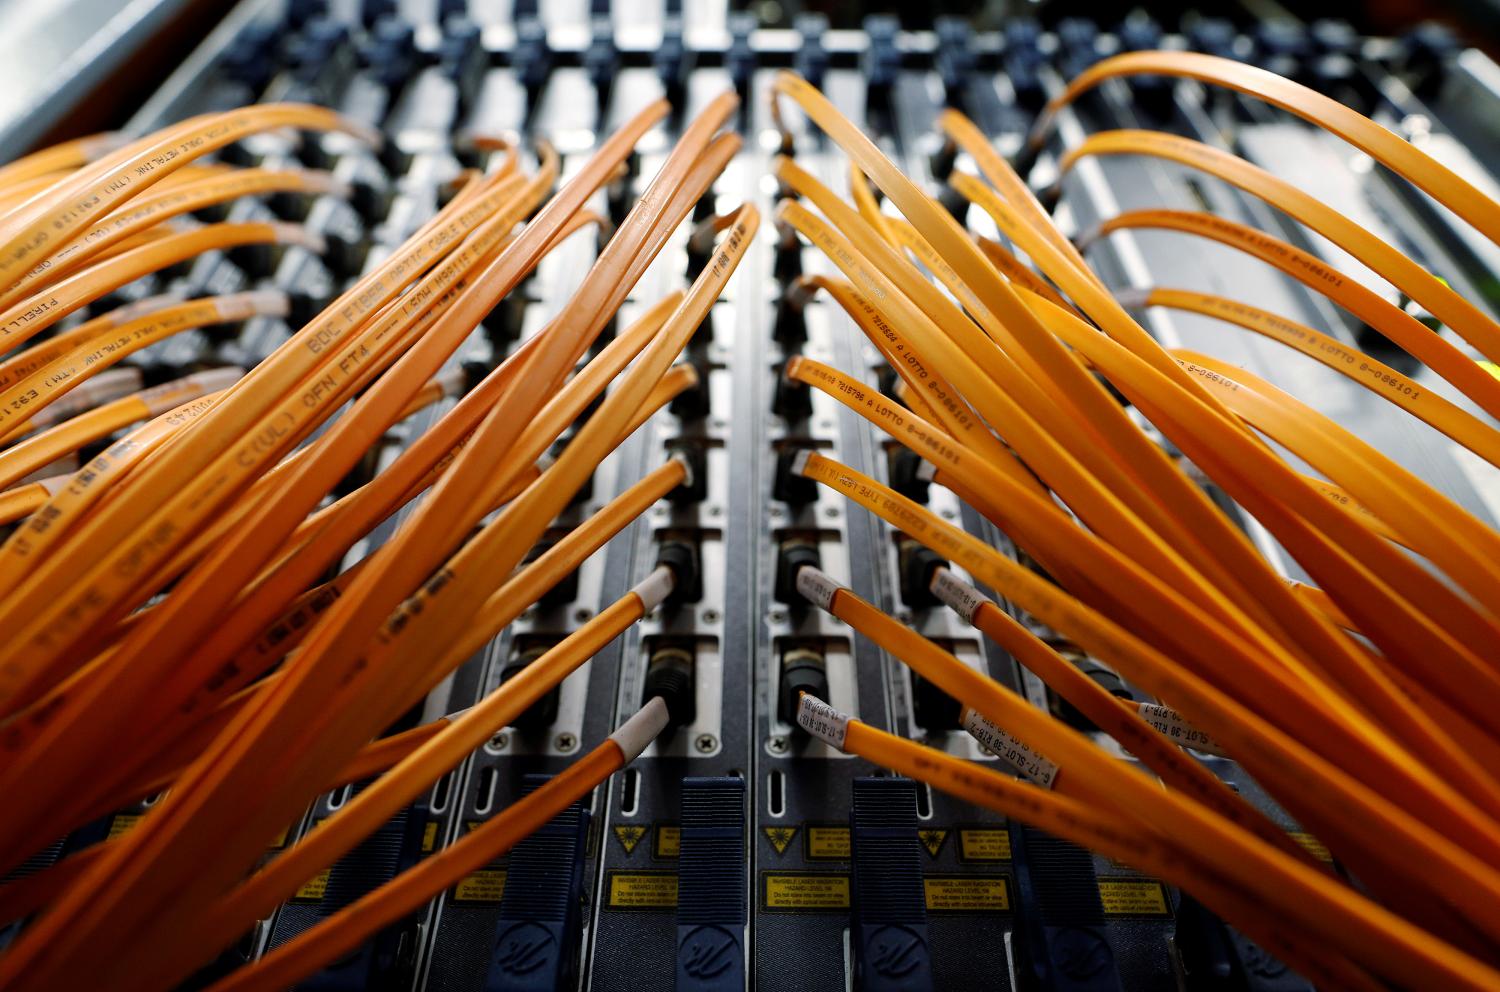 Optical fibre cables of Telecom Italia are seen in a telephone exchange in Rome, Italy